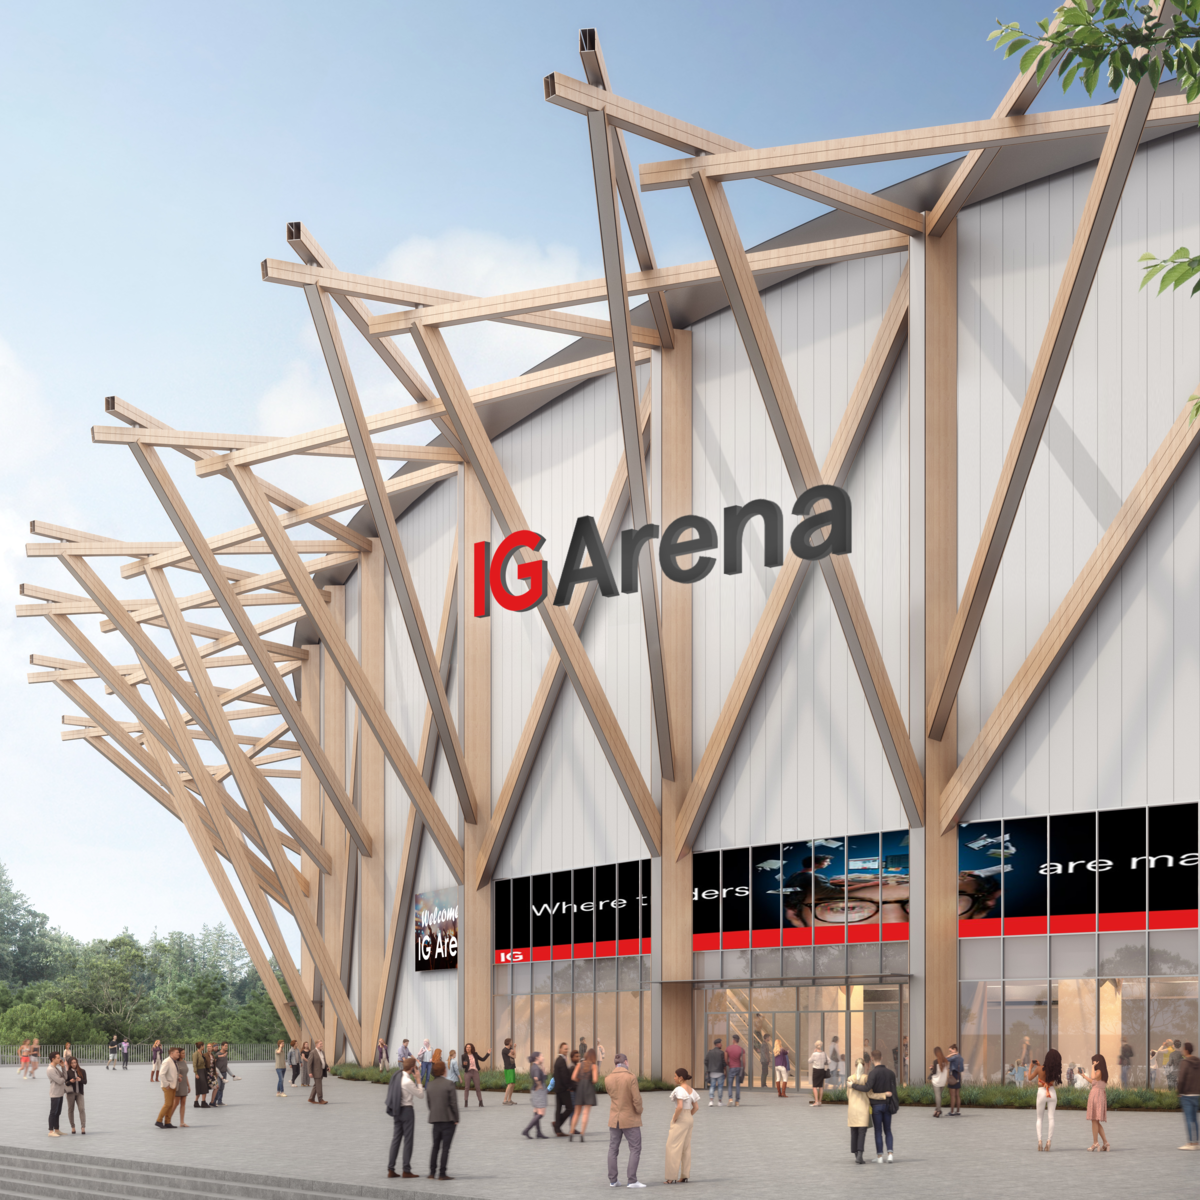 A new 17,000-seat venue for sports and live entertainment currently under construction in Nagoya, Japan is set to open in 2025 will be called IG Arena